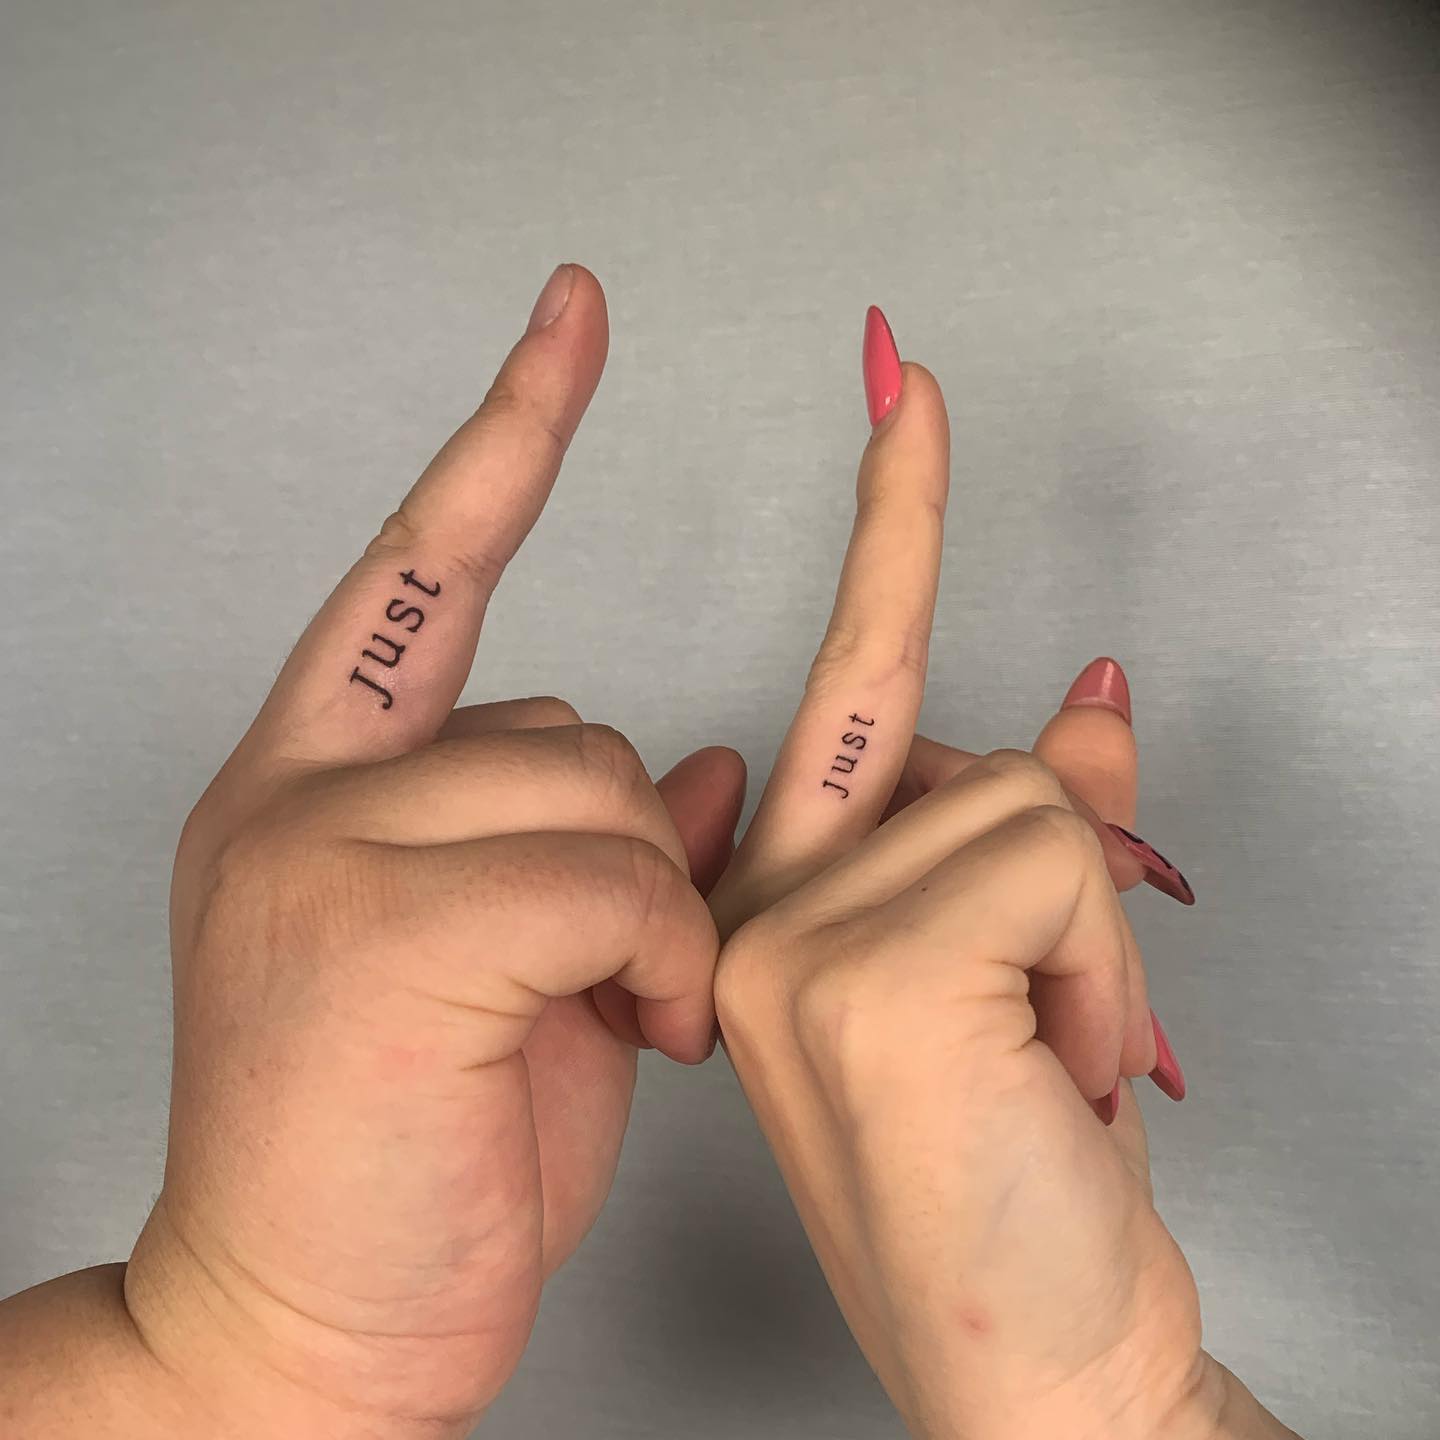 Matching “Just” Word Tattoo Inside Middle Fingers